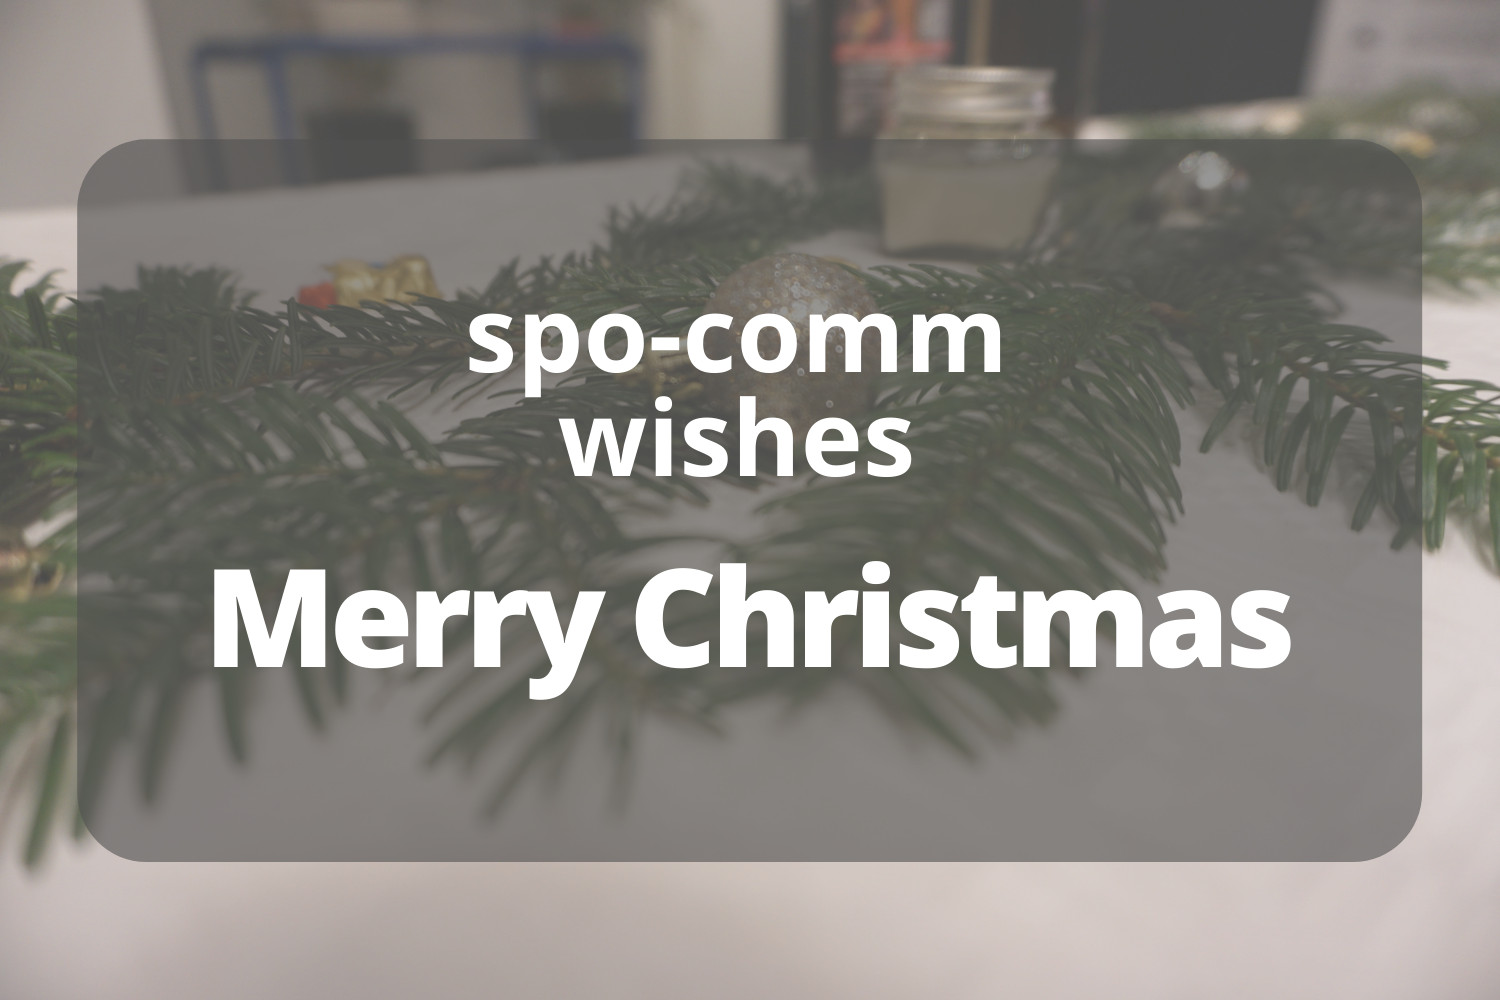  spo-comm wishes you a Merry Christmas 2020